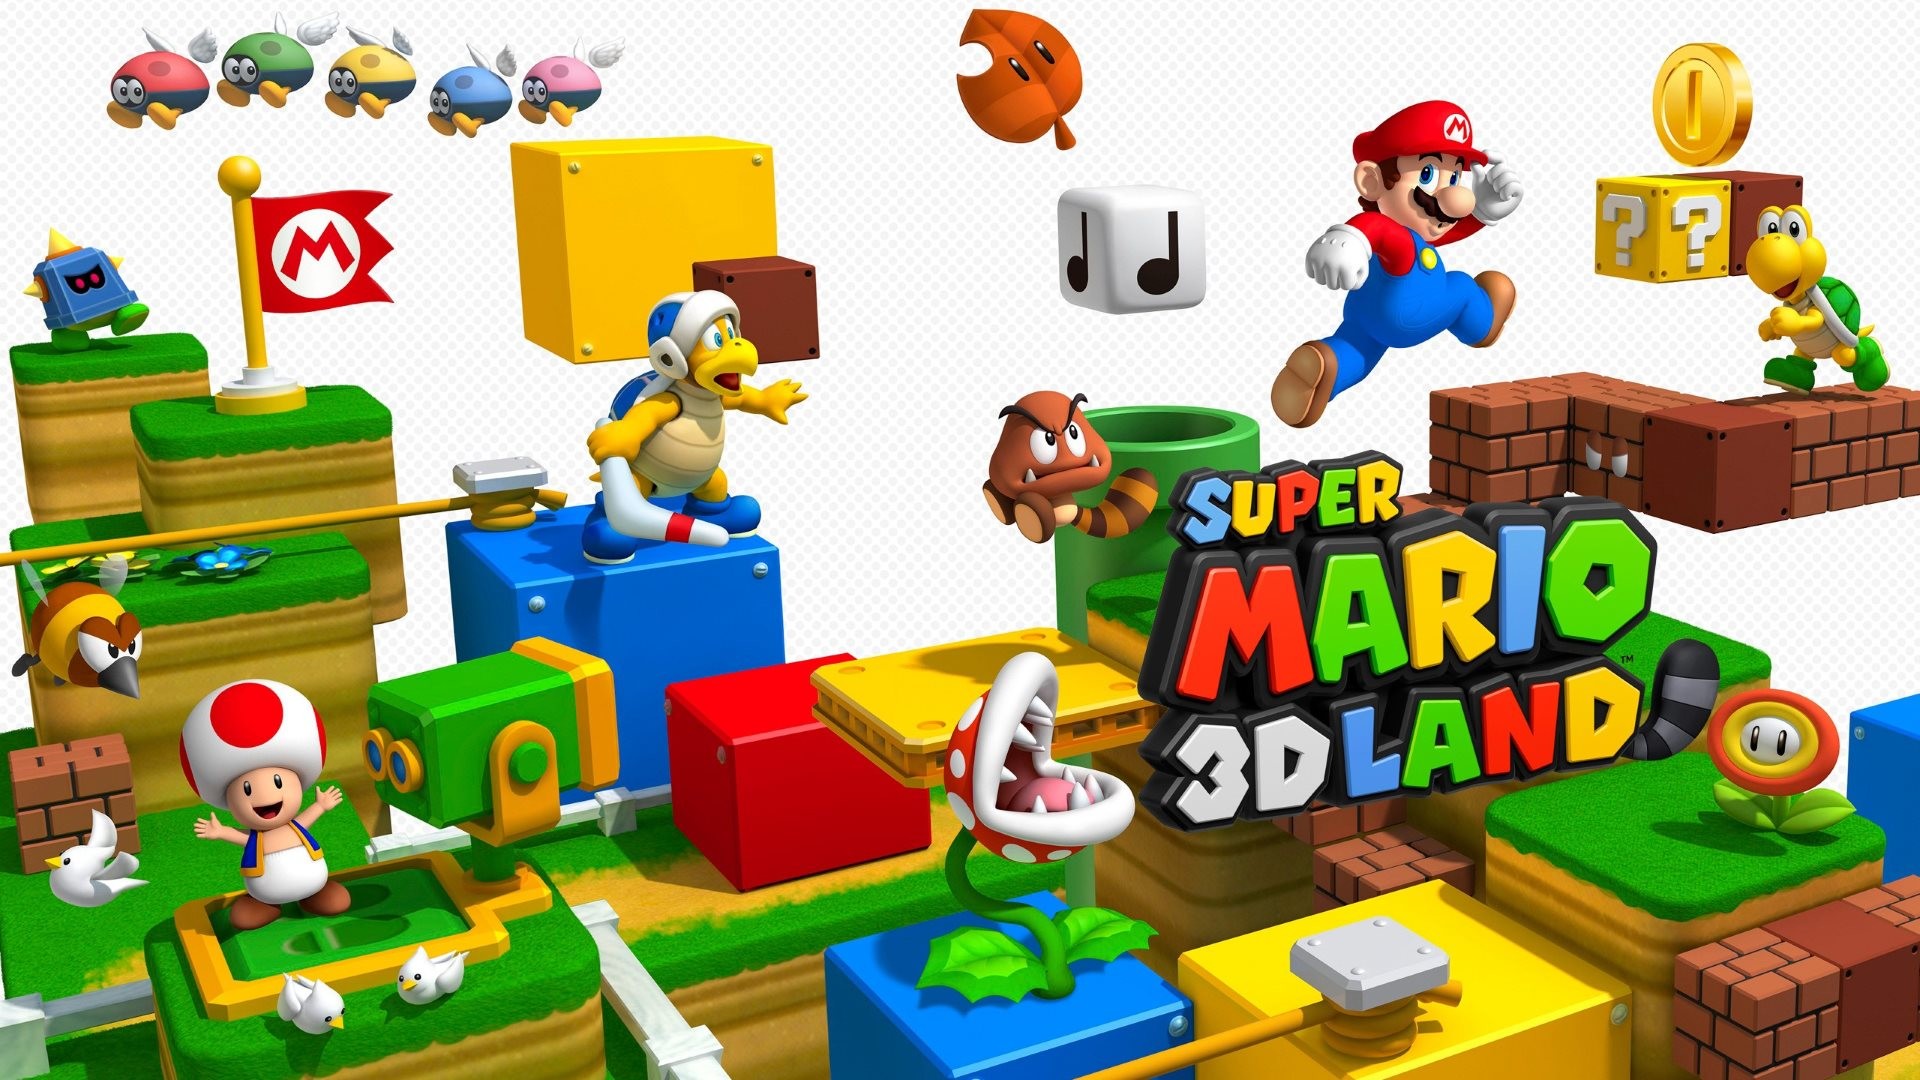 1920x1080 The 3rd wallpaper from Super Mario